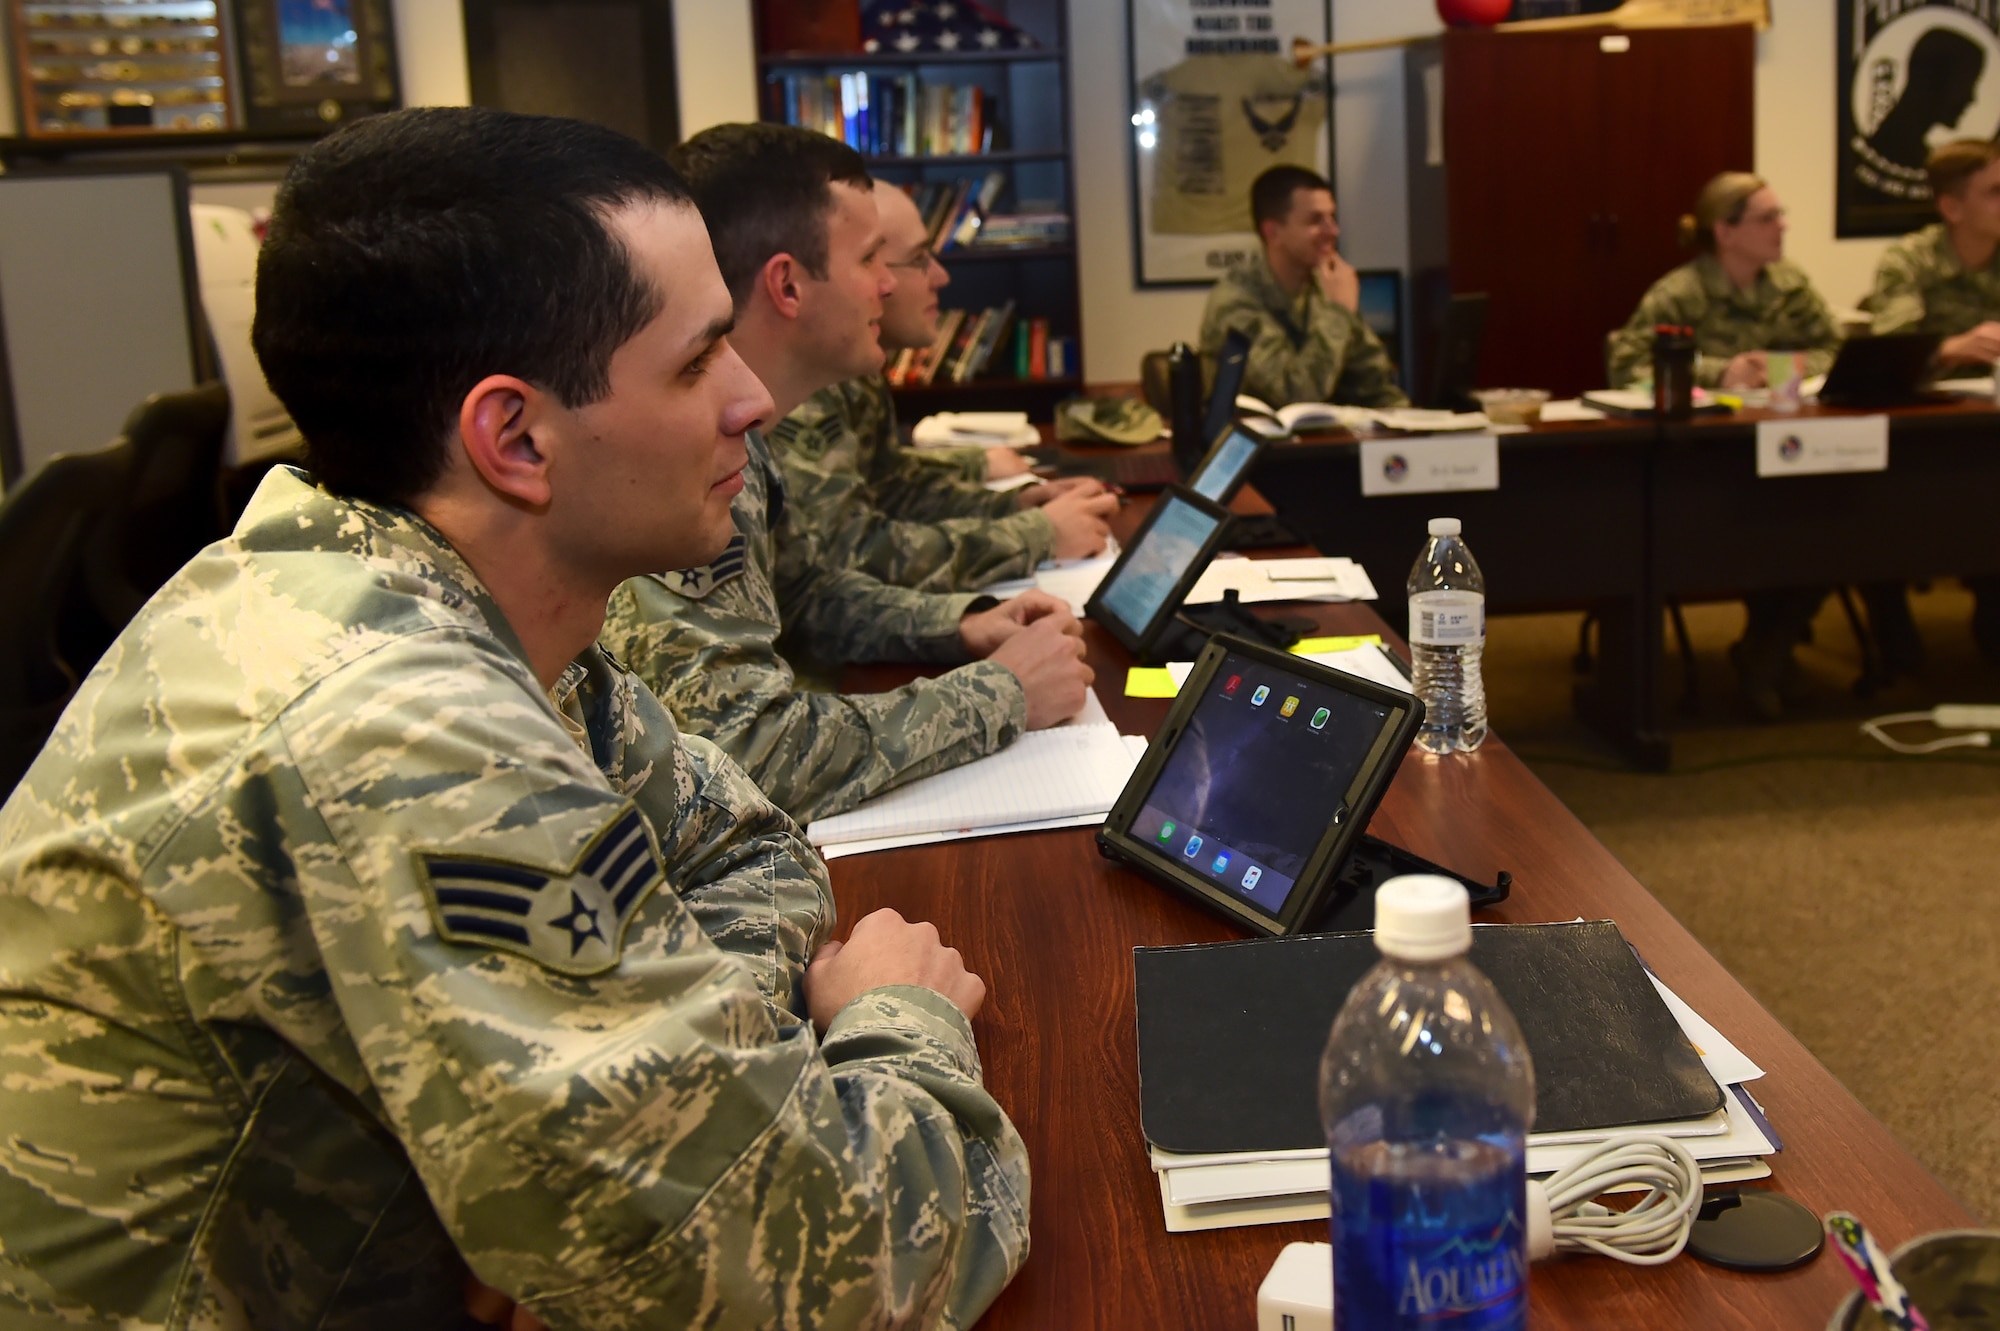 Airman Leadership School Students use iPads to better interact with instructors during class Nov. 9, 2015, on Buckley Air Force Base, Colo. ALS instructors and students utilizes the capabilities of iPads in order to improve teaching techniques and reduce resource costs. (U.S. Air Force photo by Airman 1st Class Luke W. Nowakowski/Released)